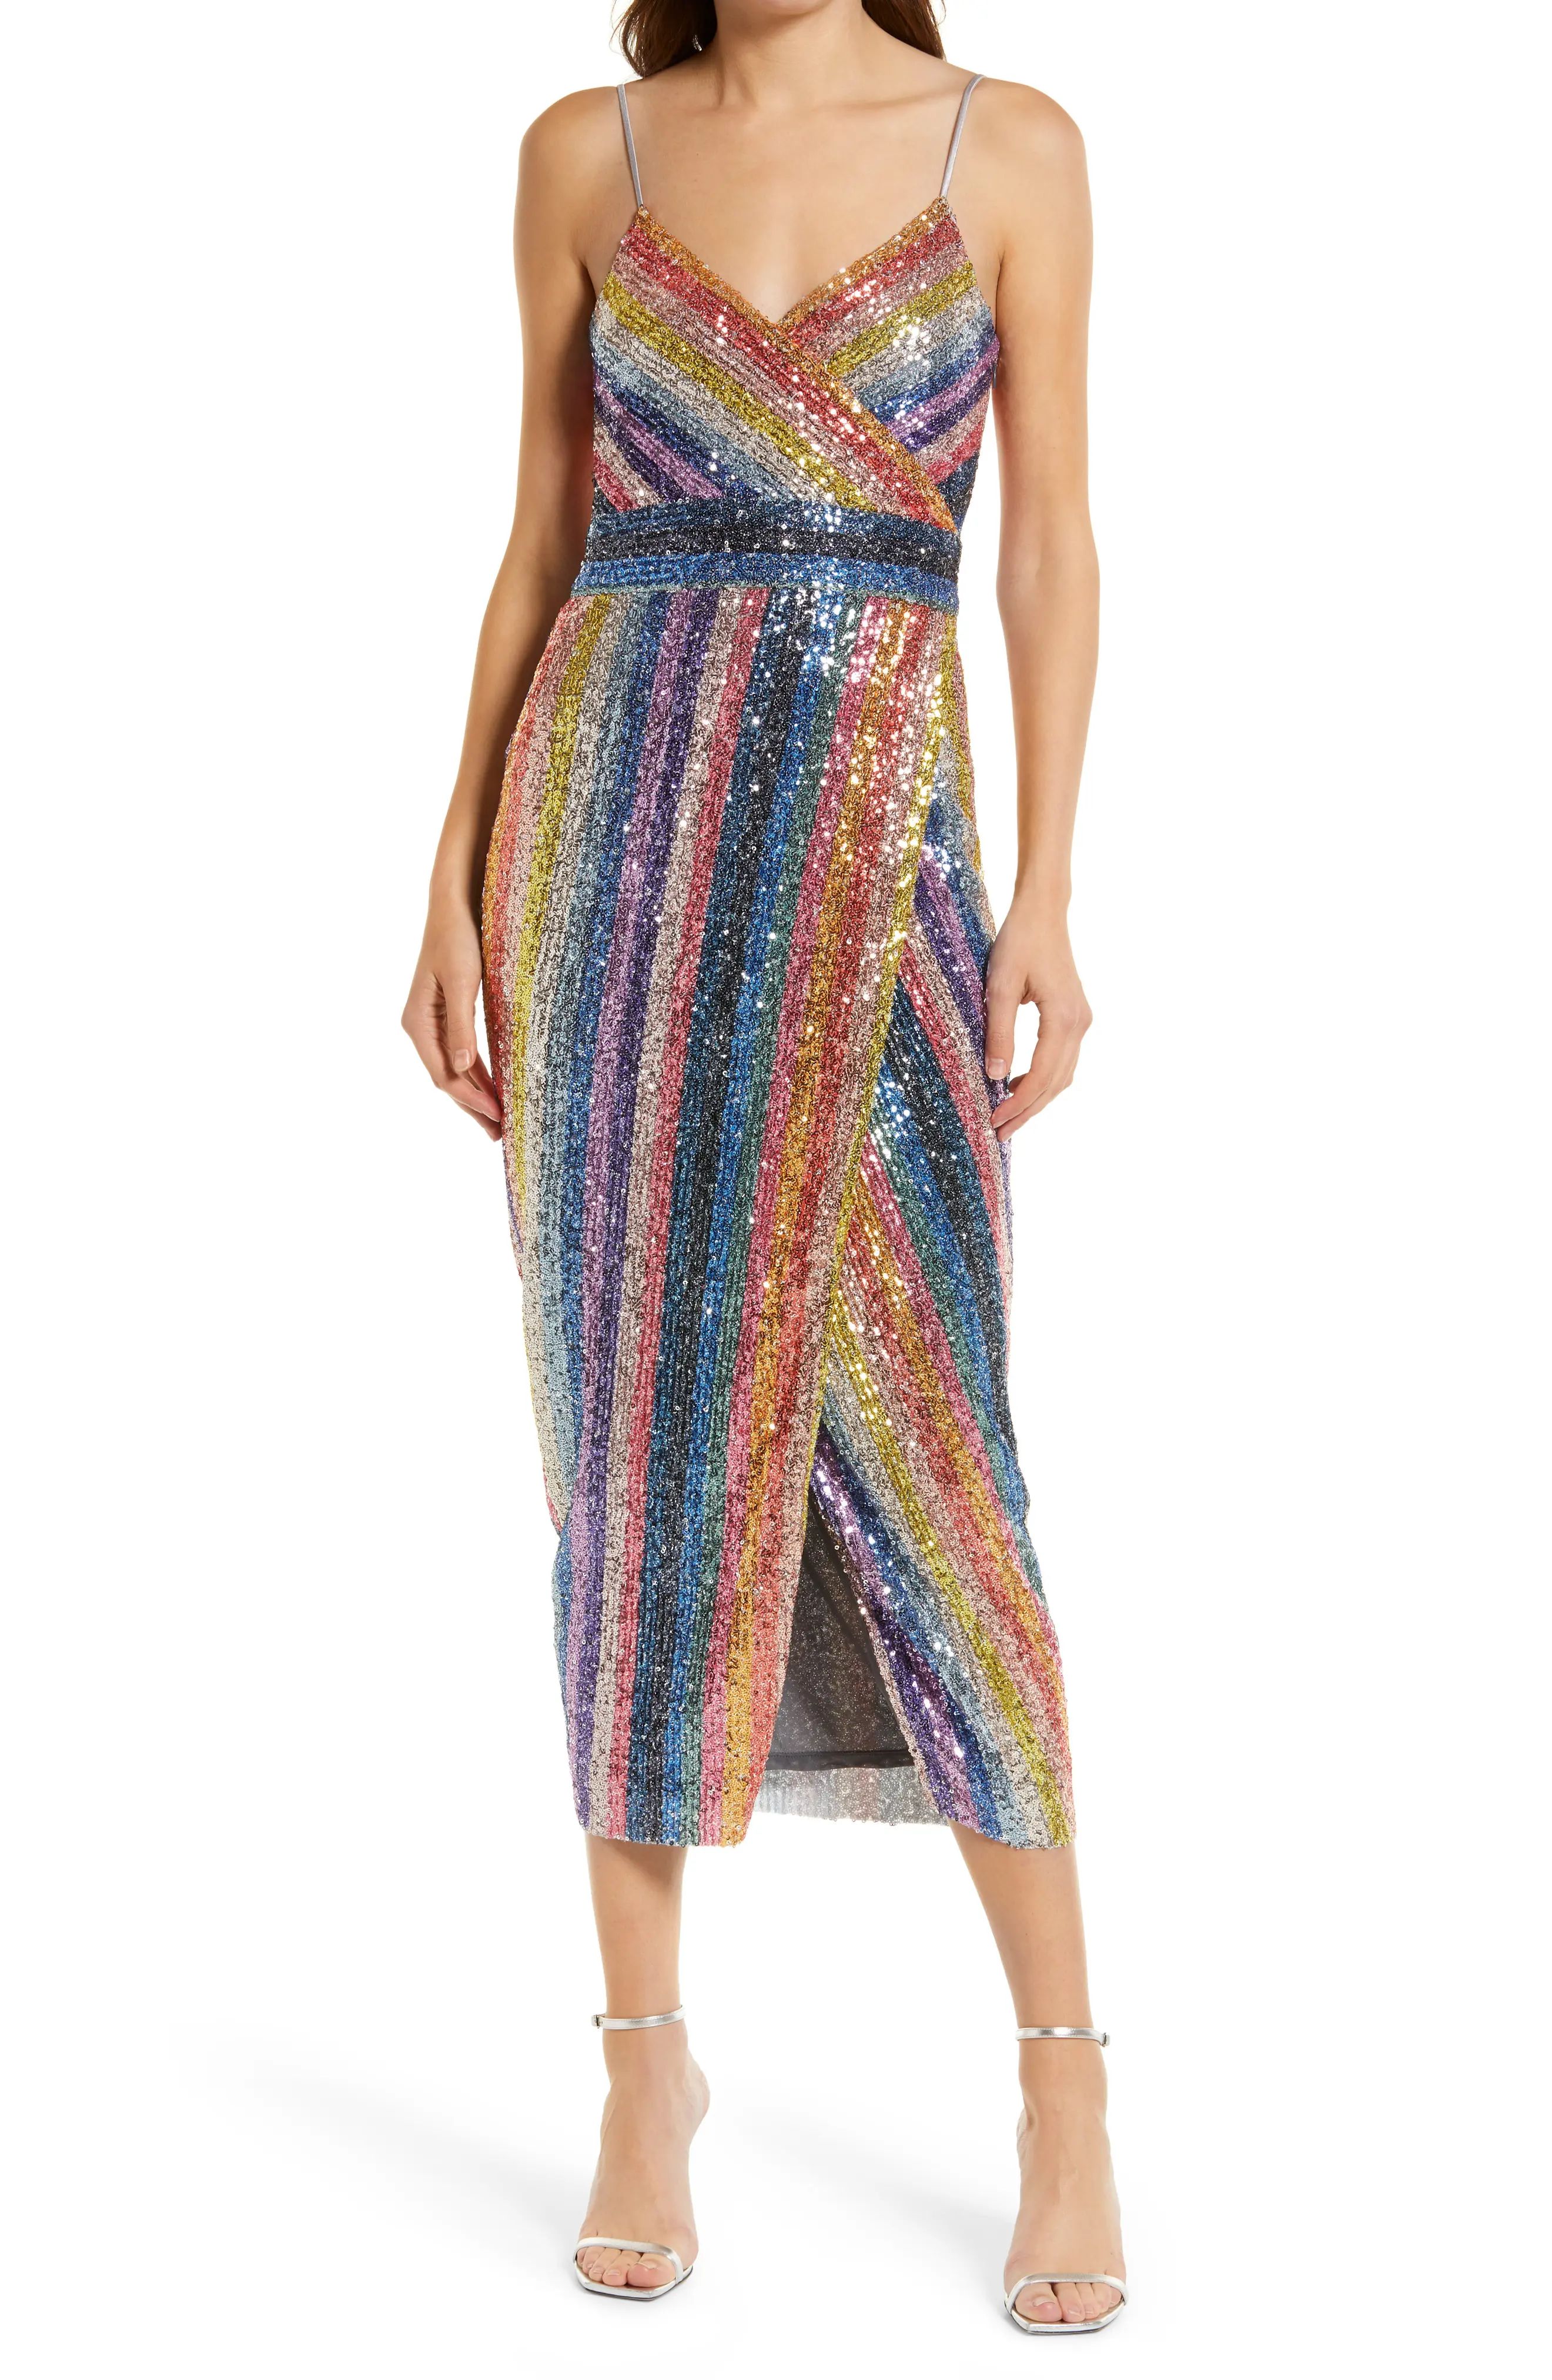 Saylor Meghan Faux Wrap Maxi Dress in Circus at Nordstrom, Size Small | Nordstrom